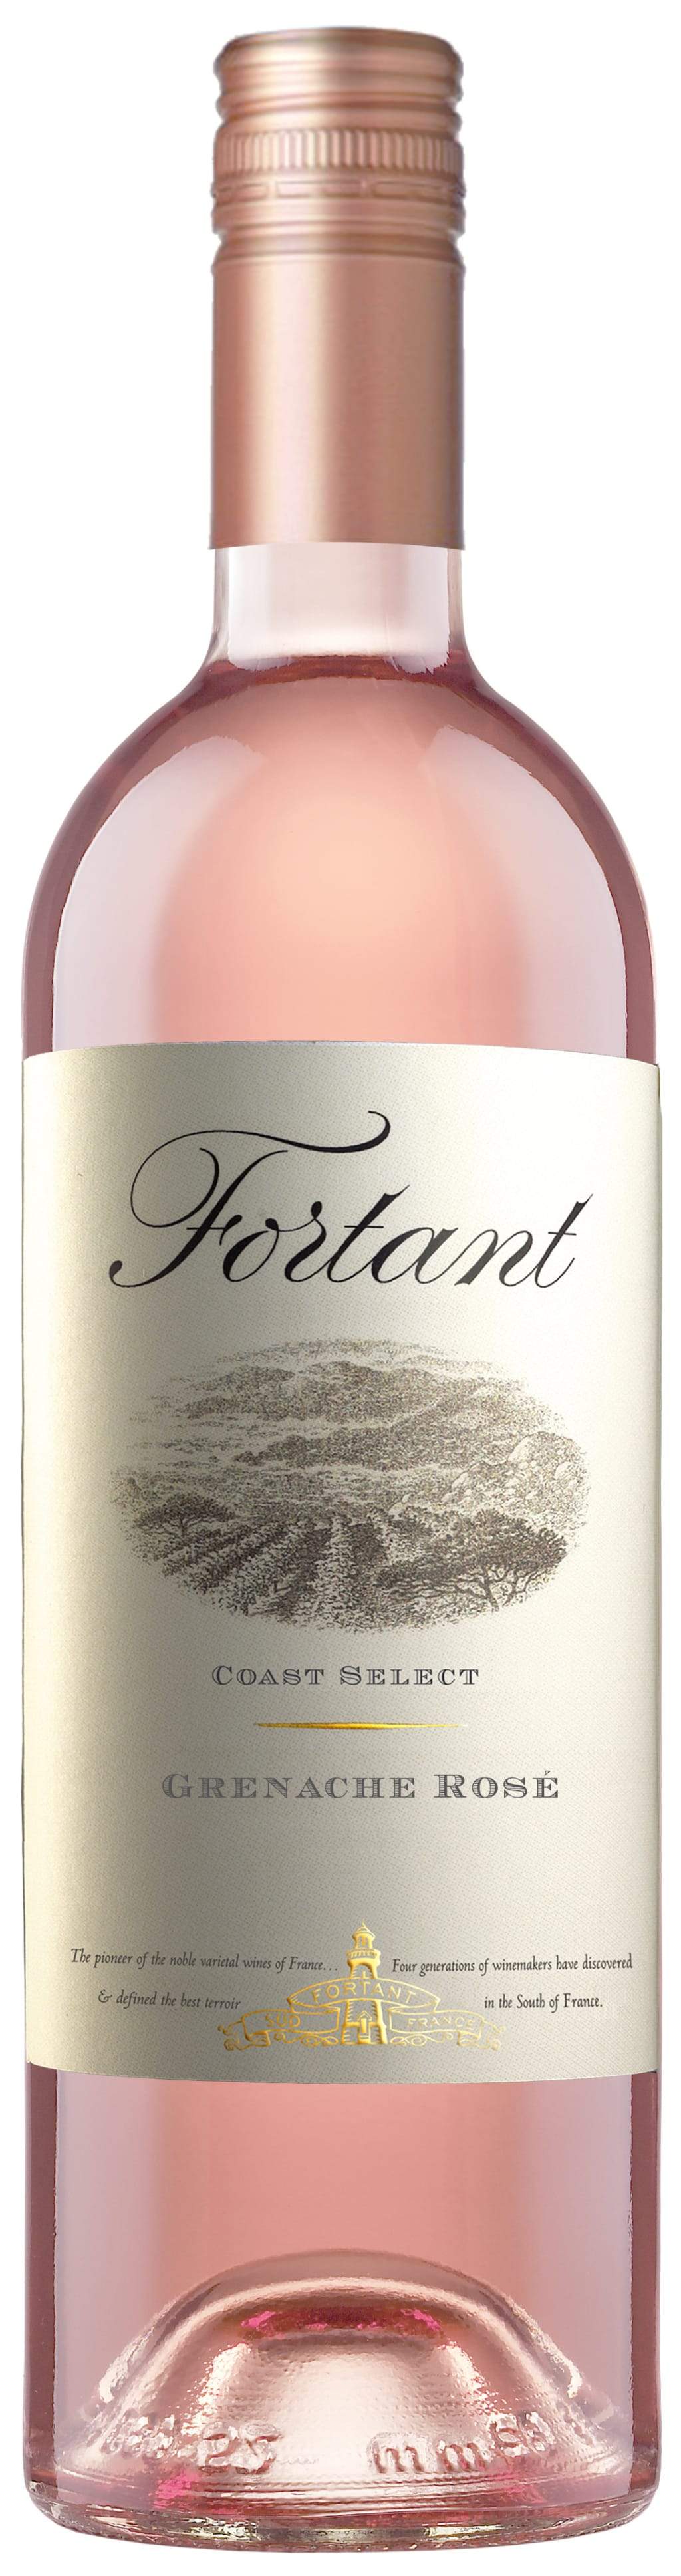 Fortant Grenache Rose Coast Select 2018